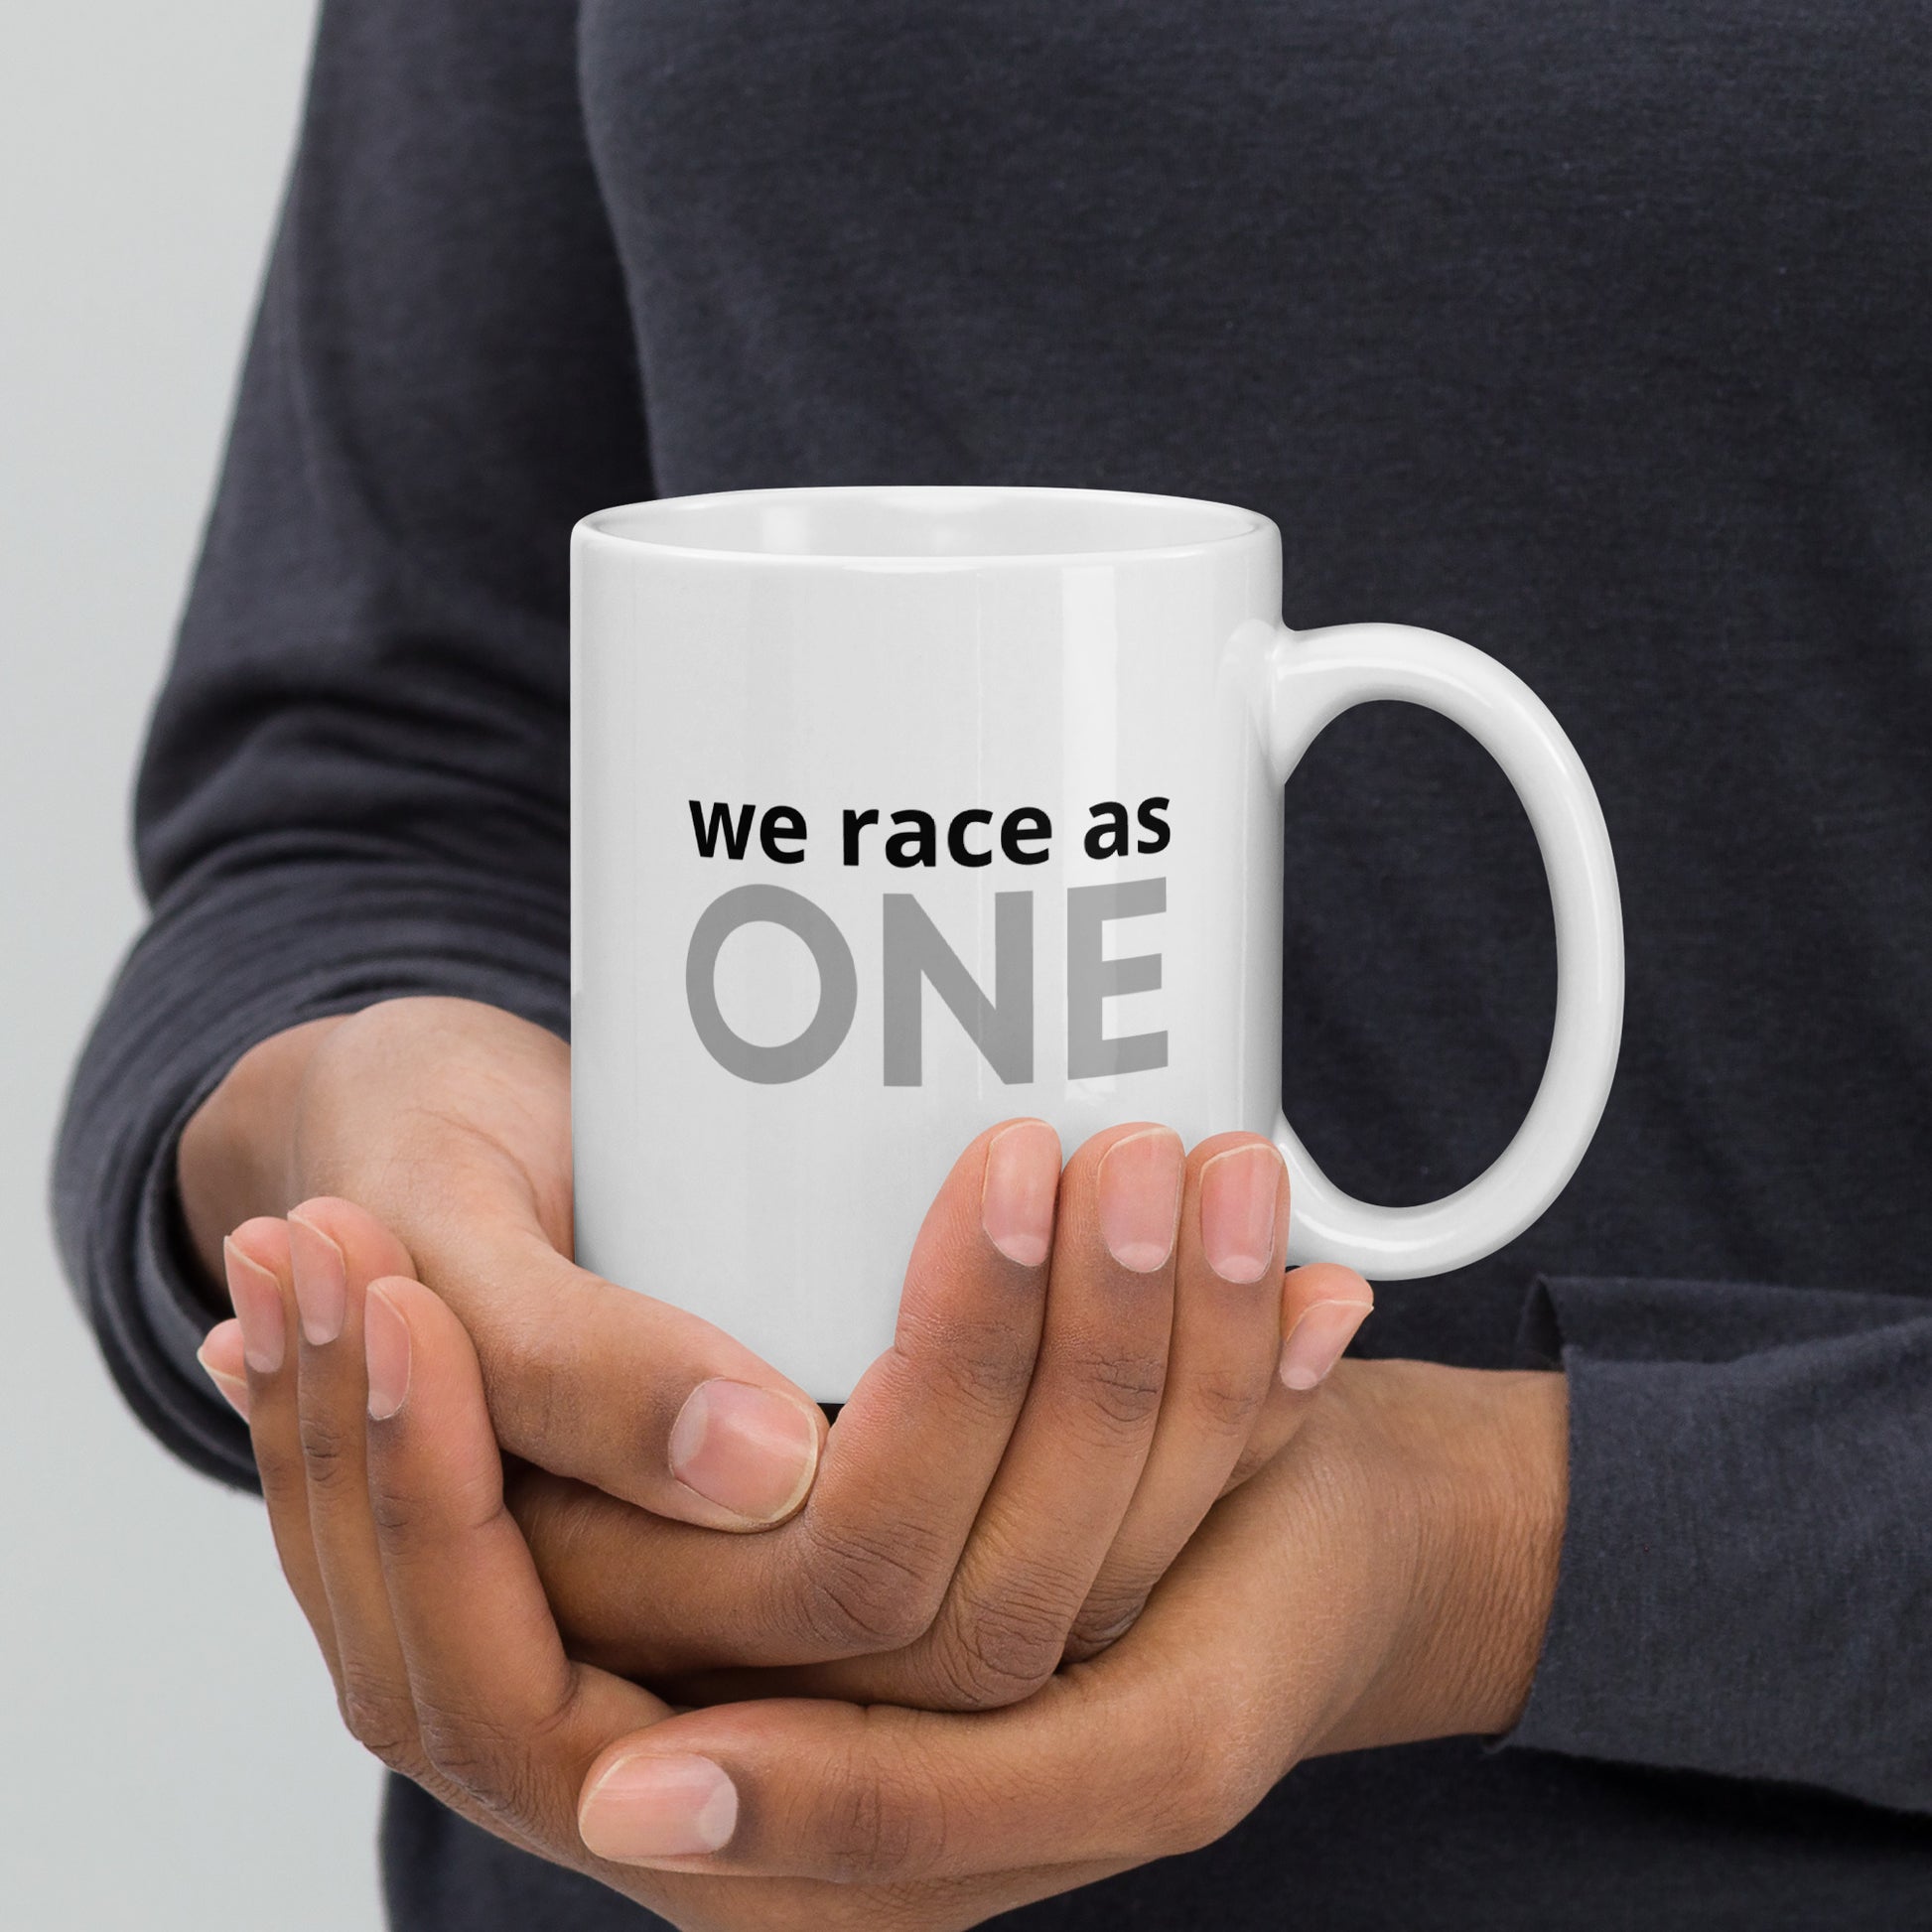 coffee mug showing the text "we race as one"